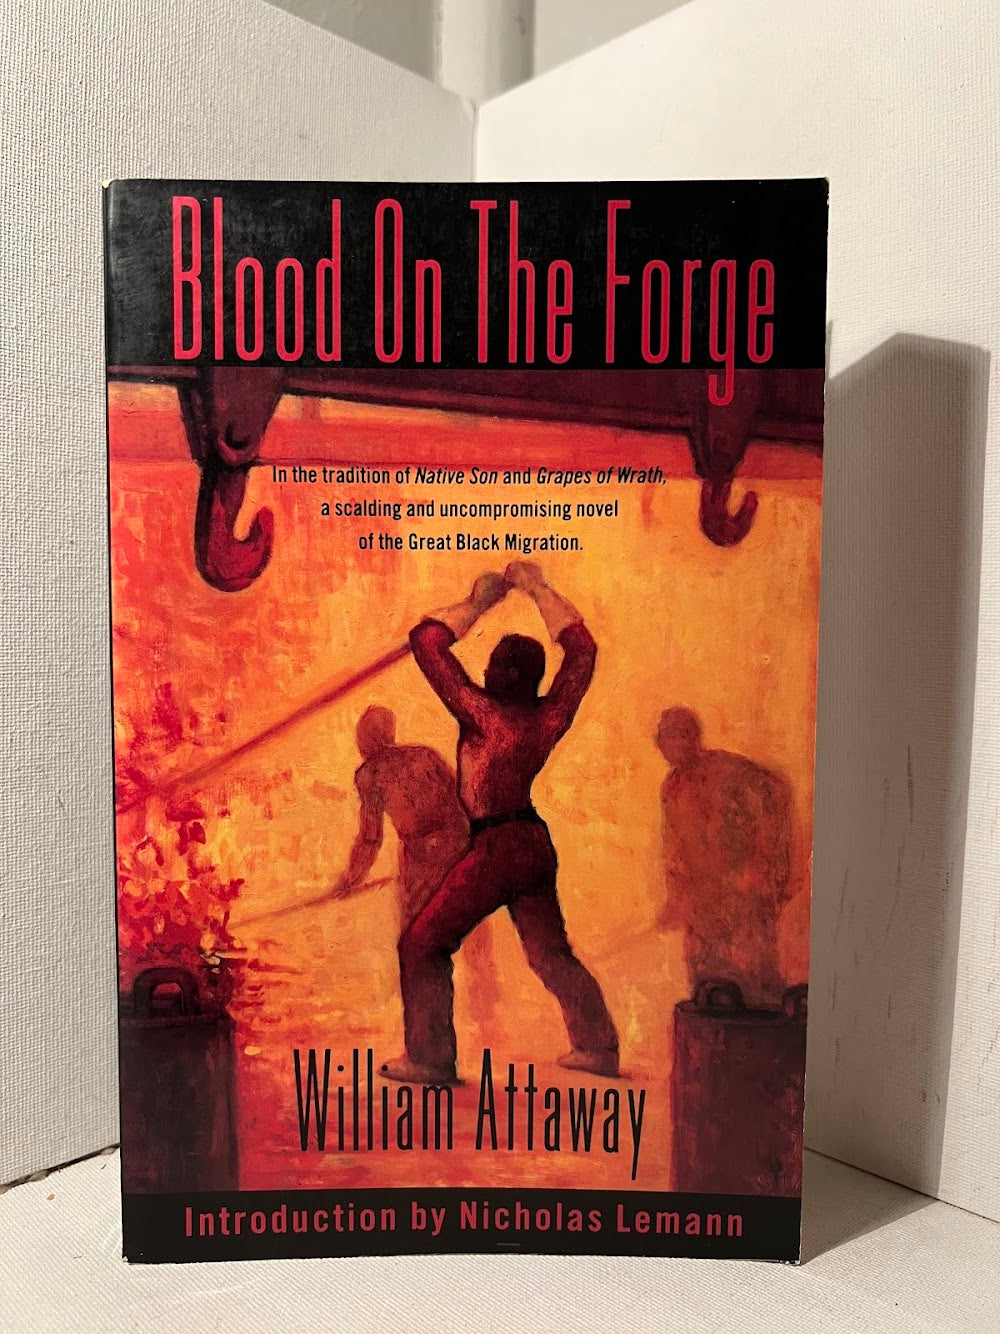 Blood on the Forge by William Attaway